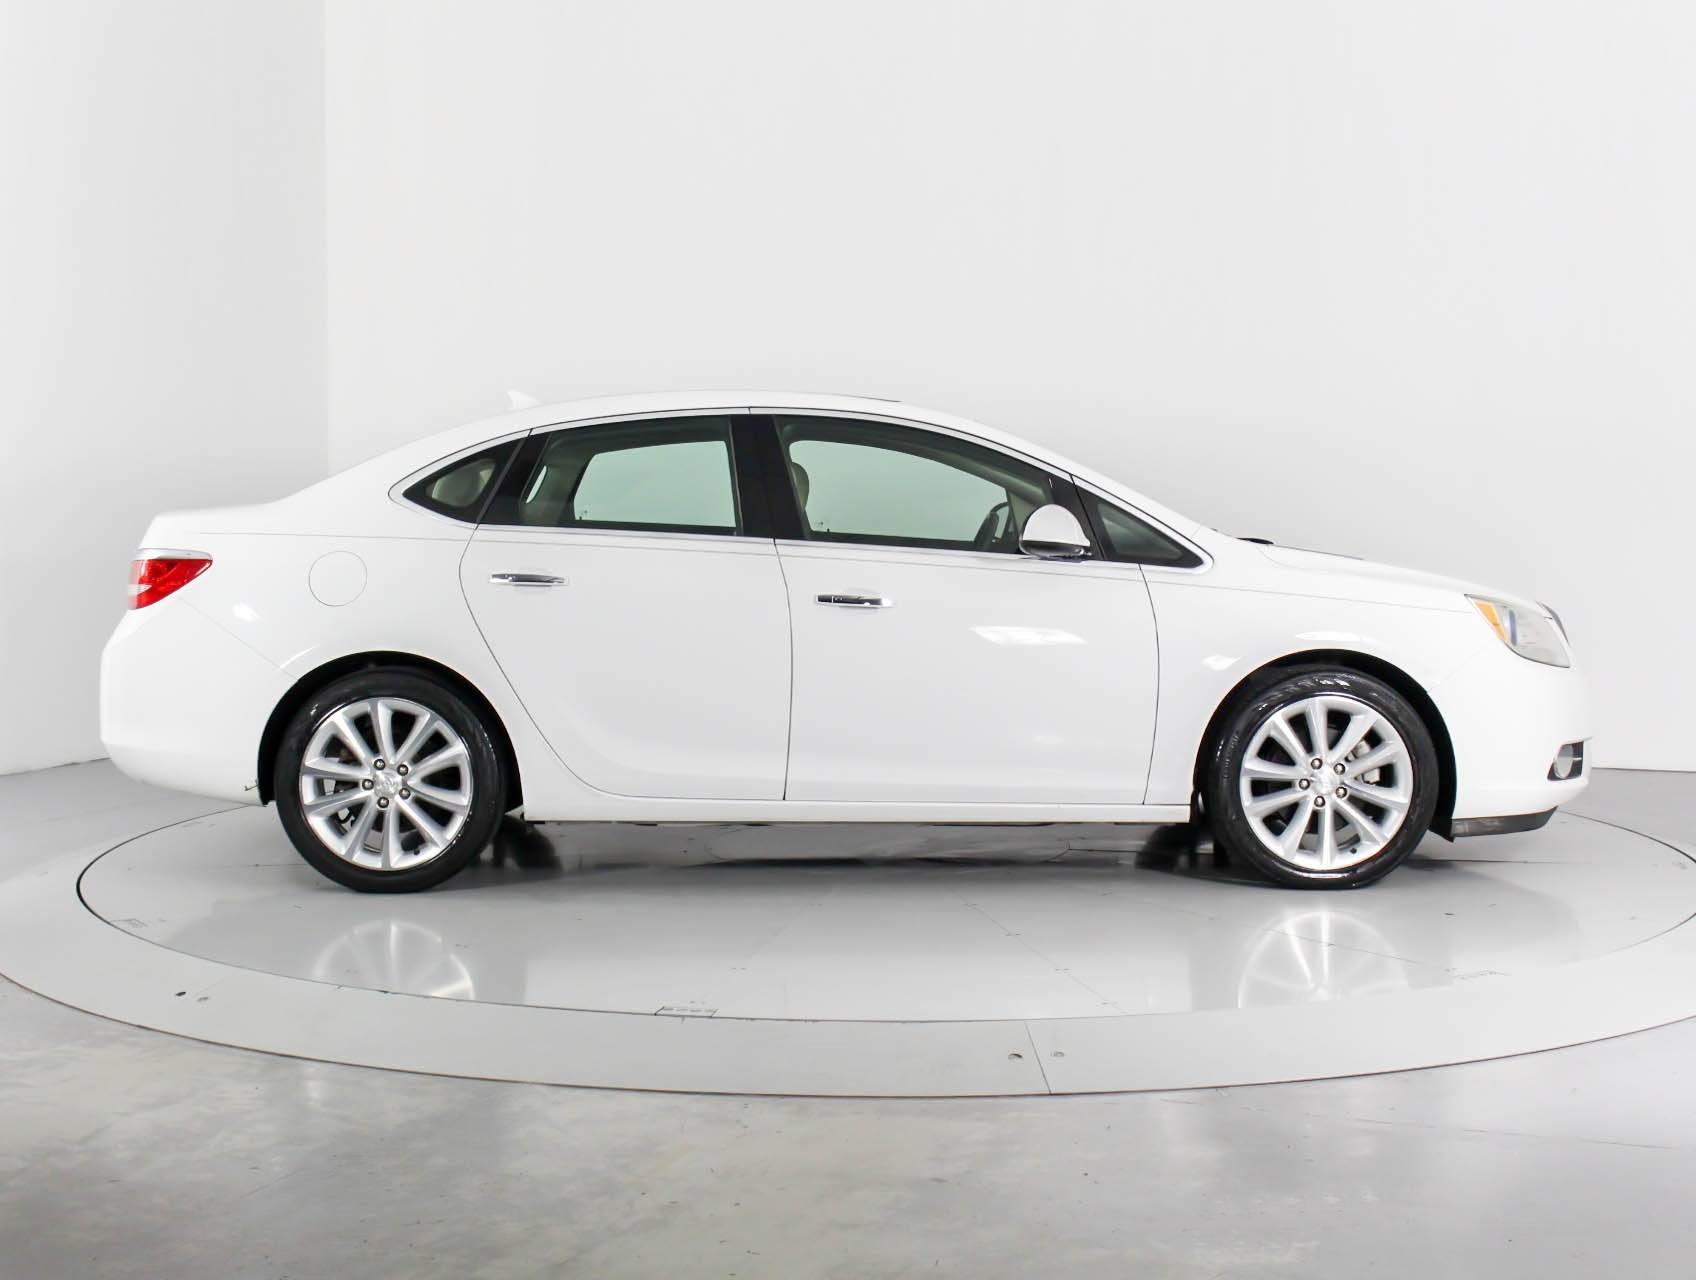 Florida Fine Cars - Used BUICK VERANO 2013 WEST PALM LEATHER